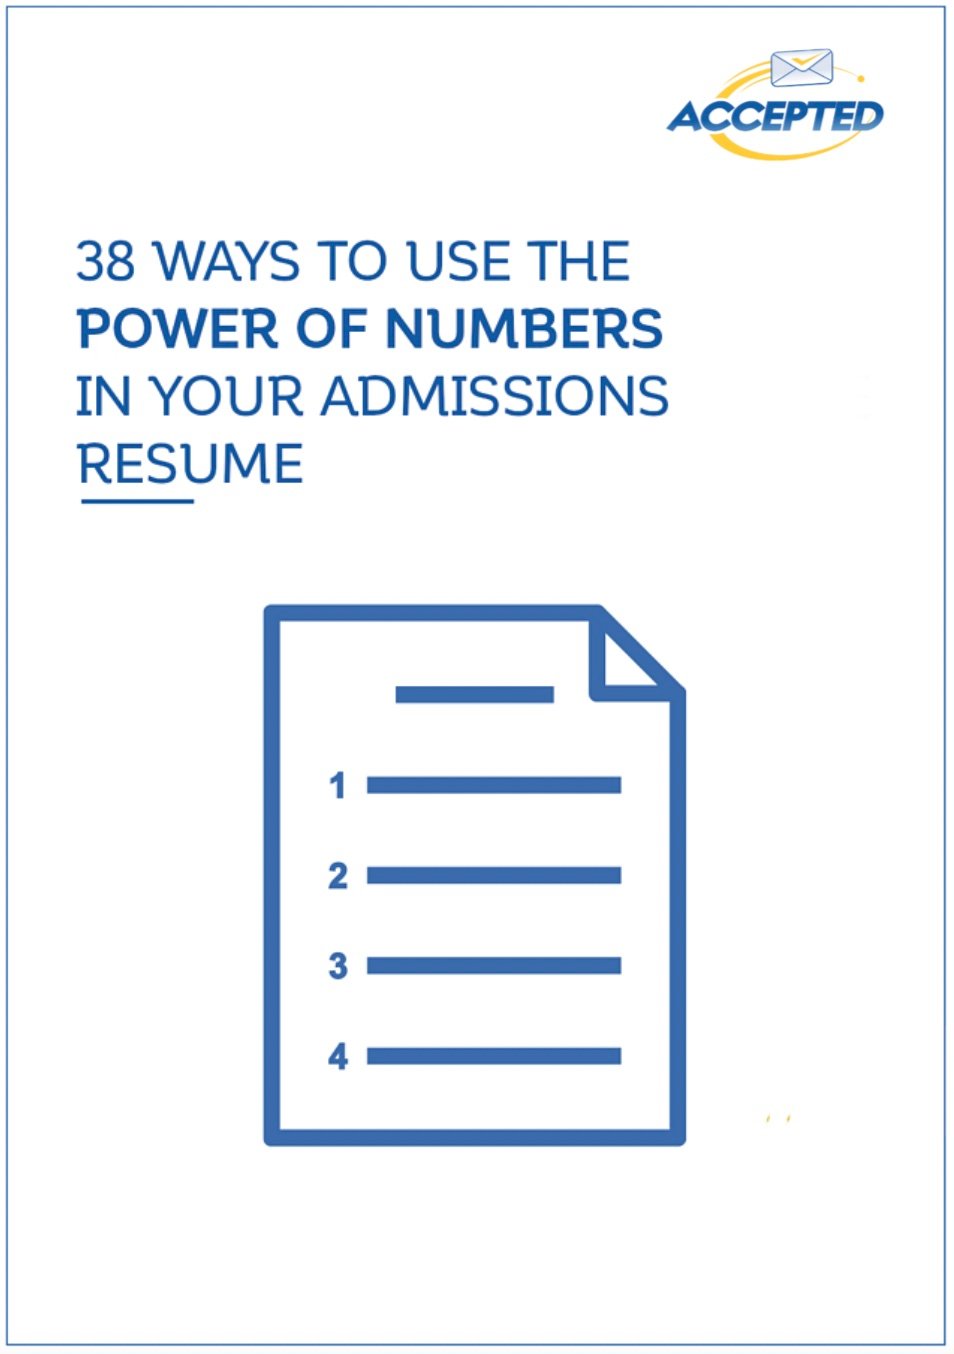 38 Ways to Use the Power of Numbers in Your Admissions Resume